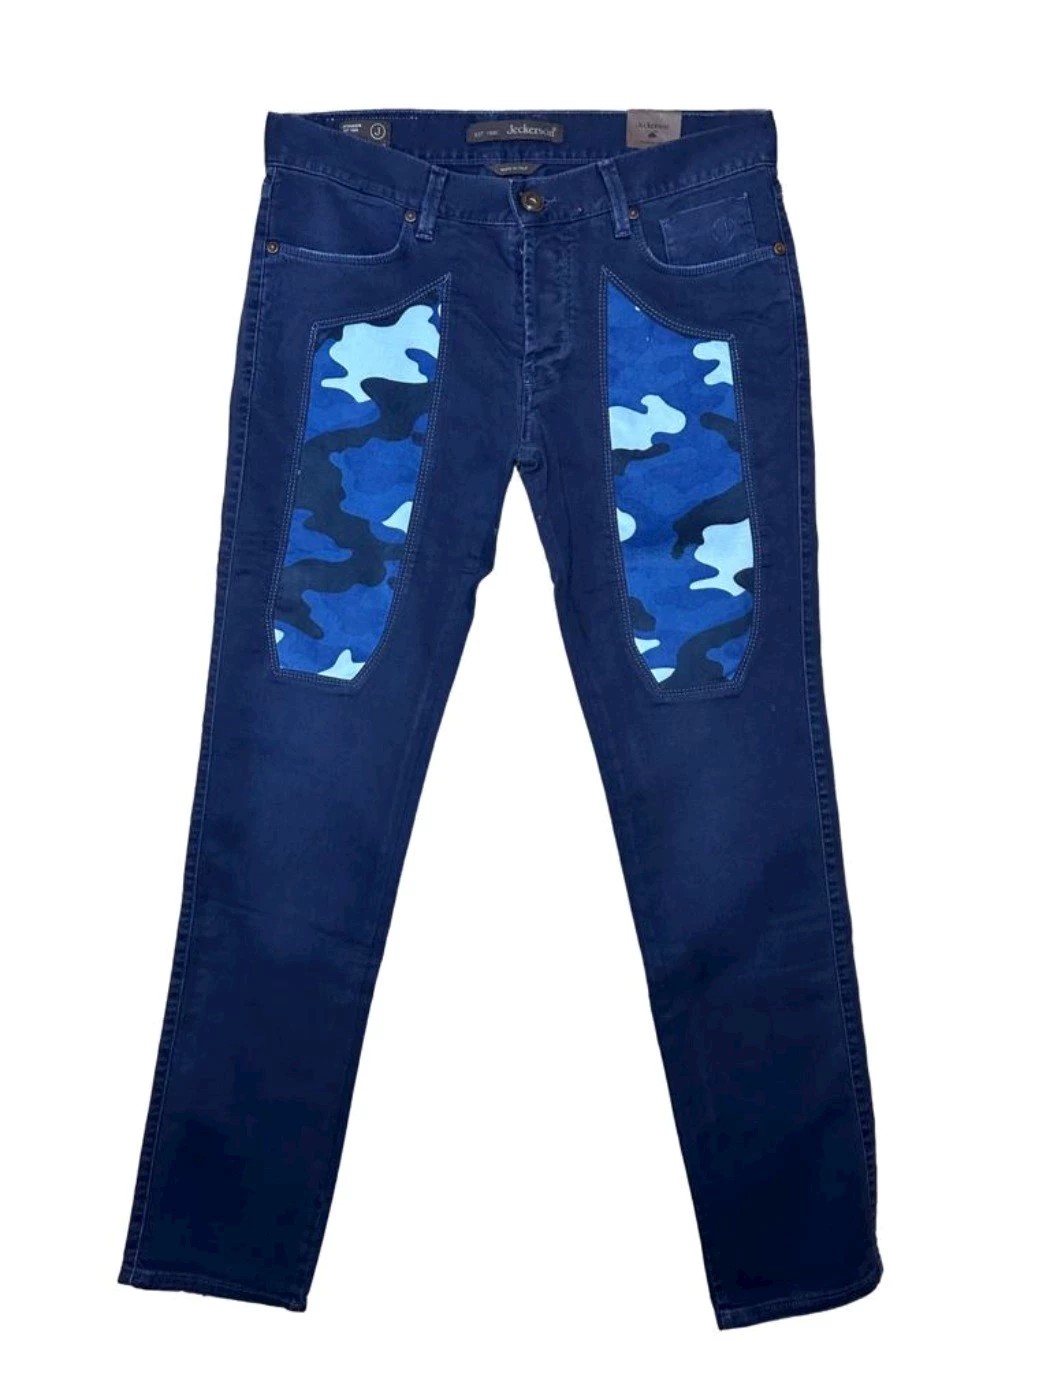 Jeans with Jeckerson patterned alcantara patch